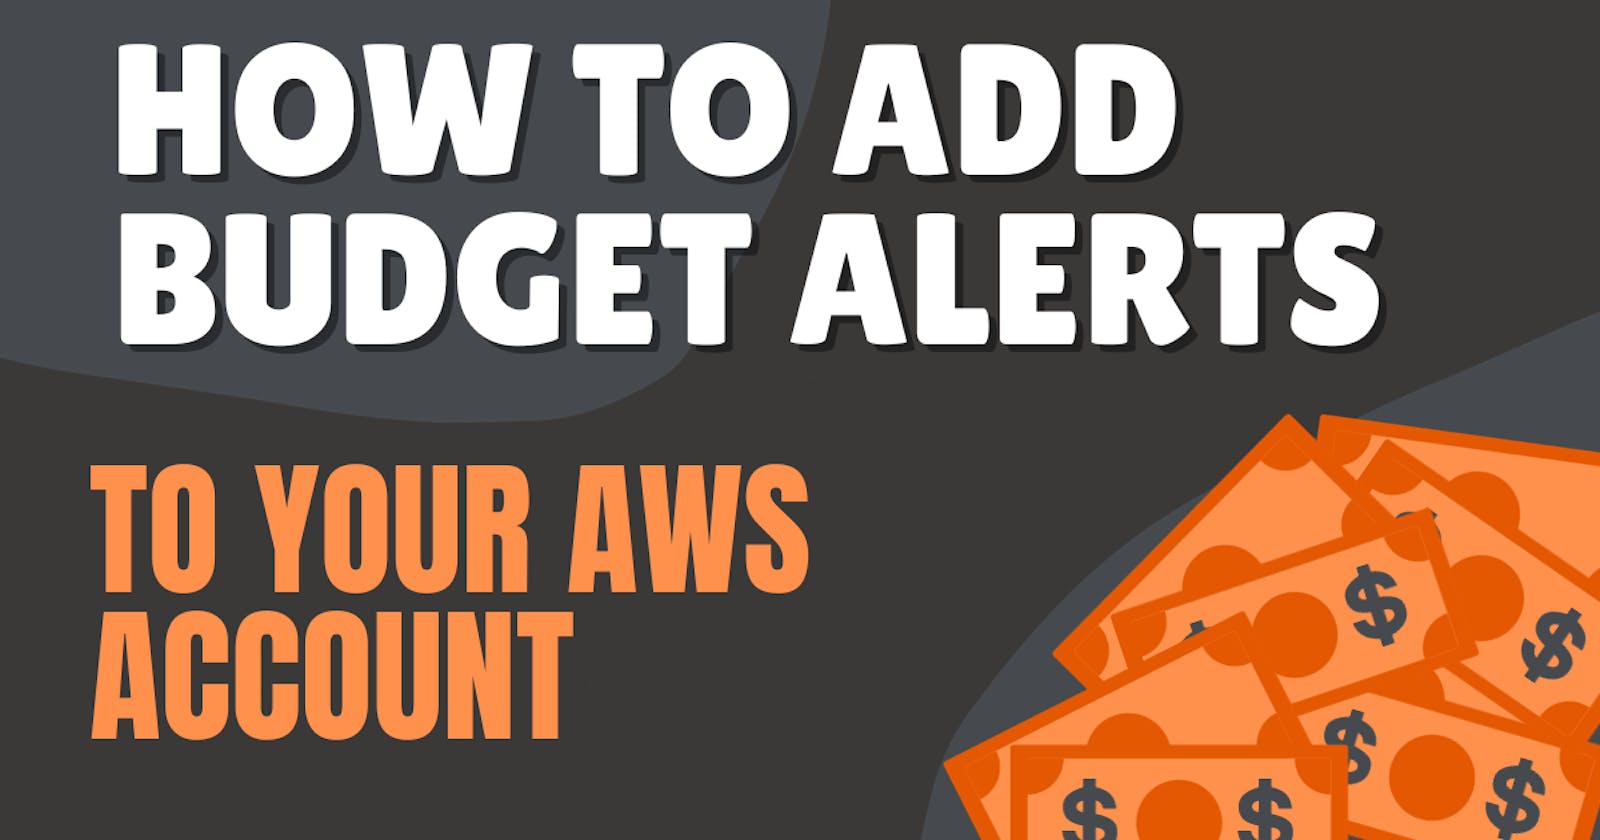 How to add budget alerts to your AWS account